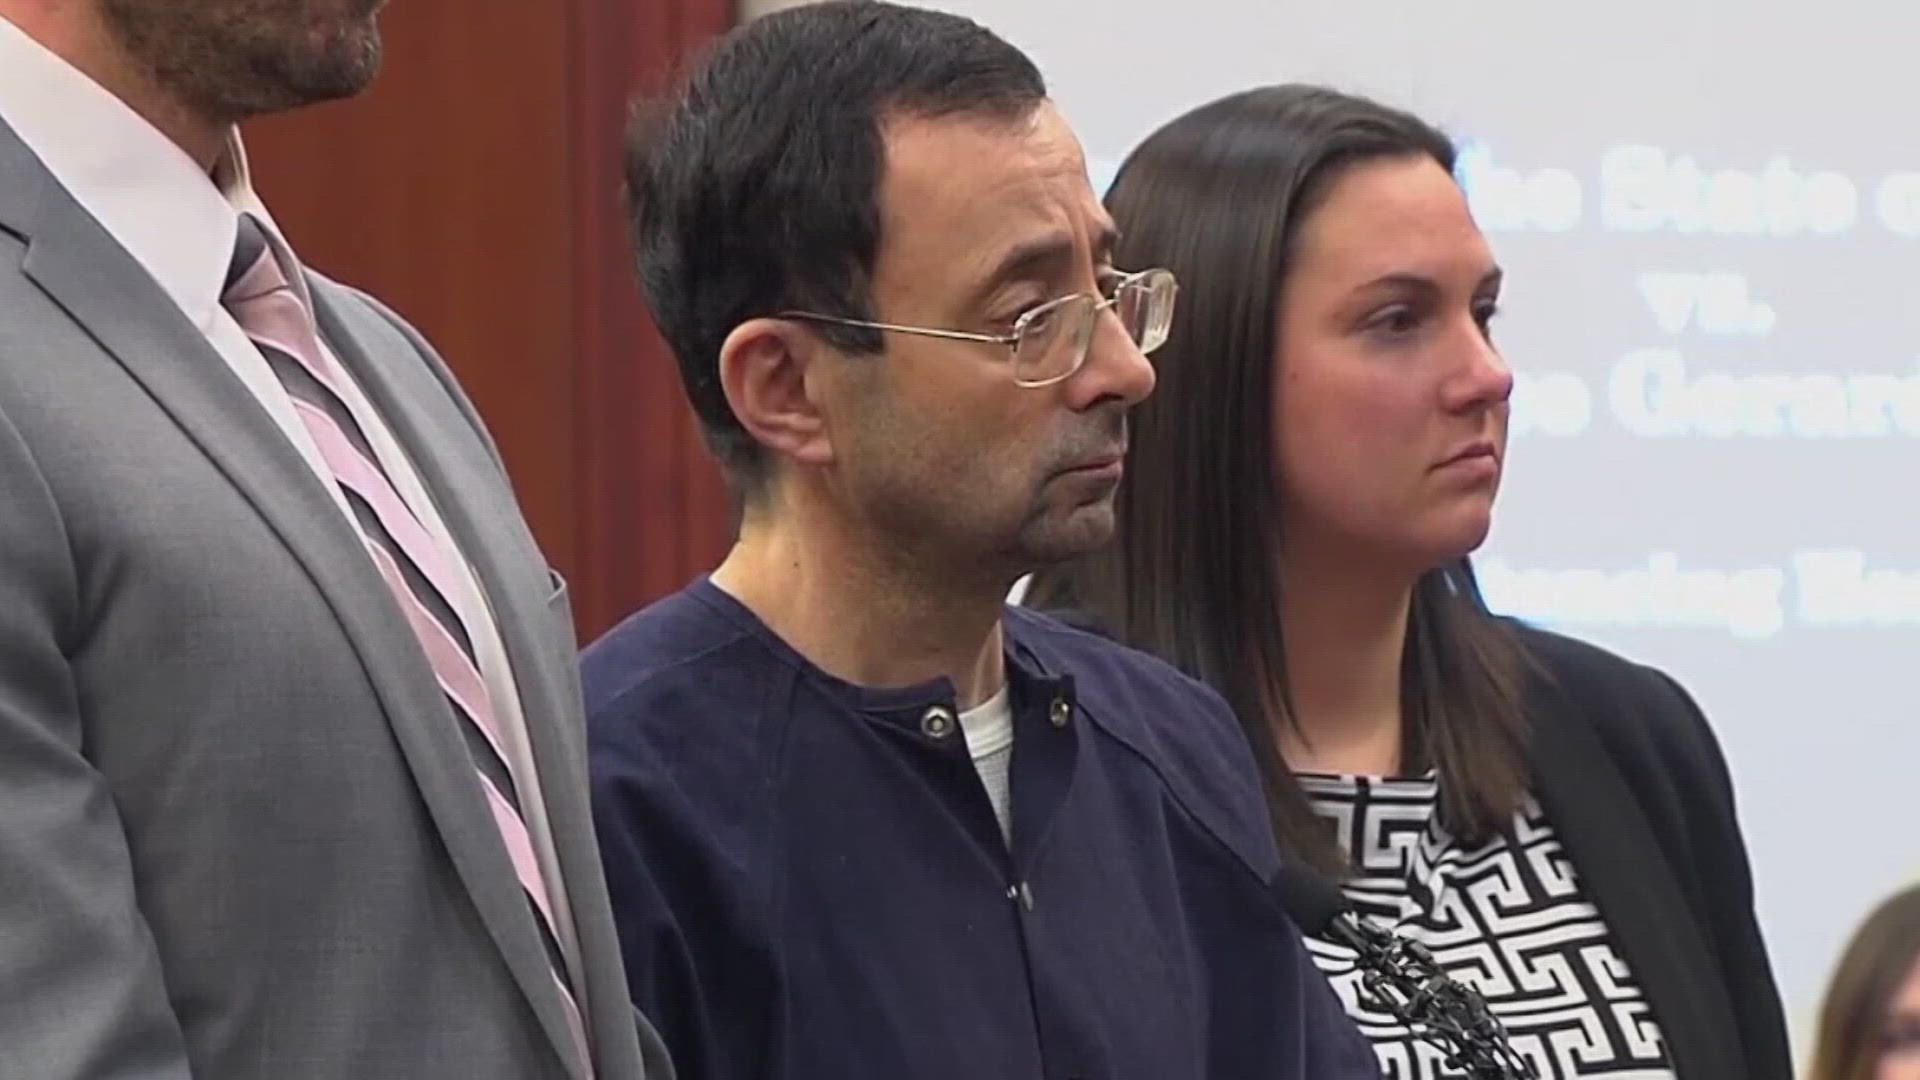 The money will reportedly be split between 100 victims of the former USA Gymnastics doctor.